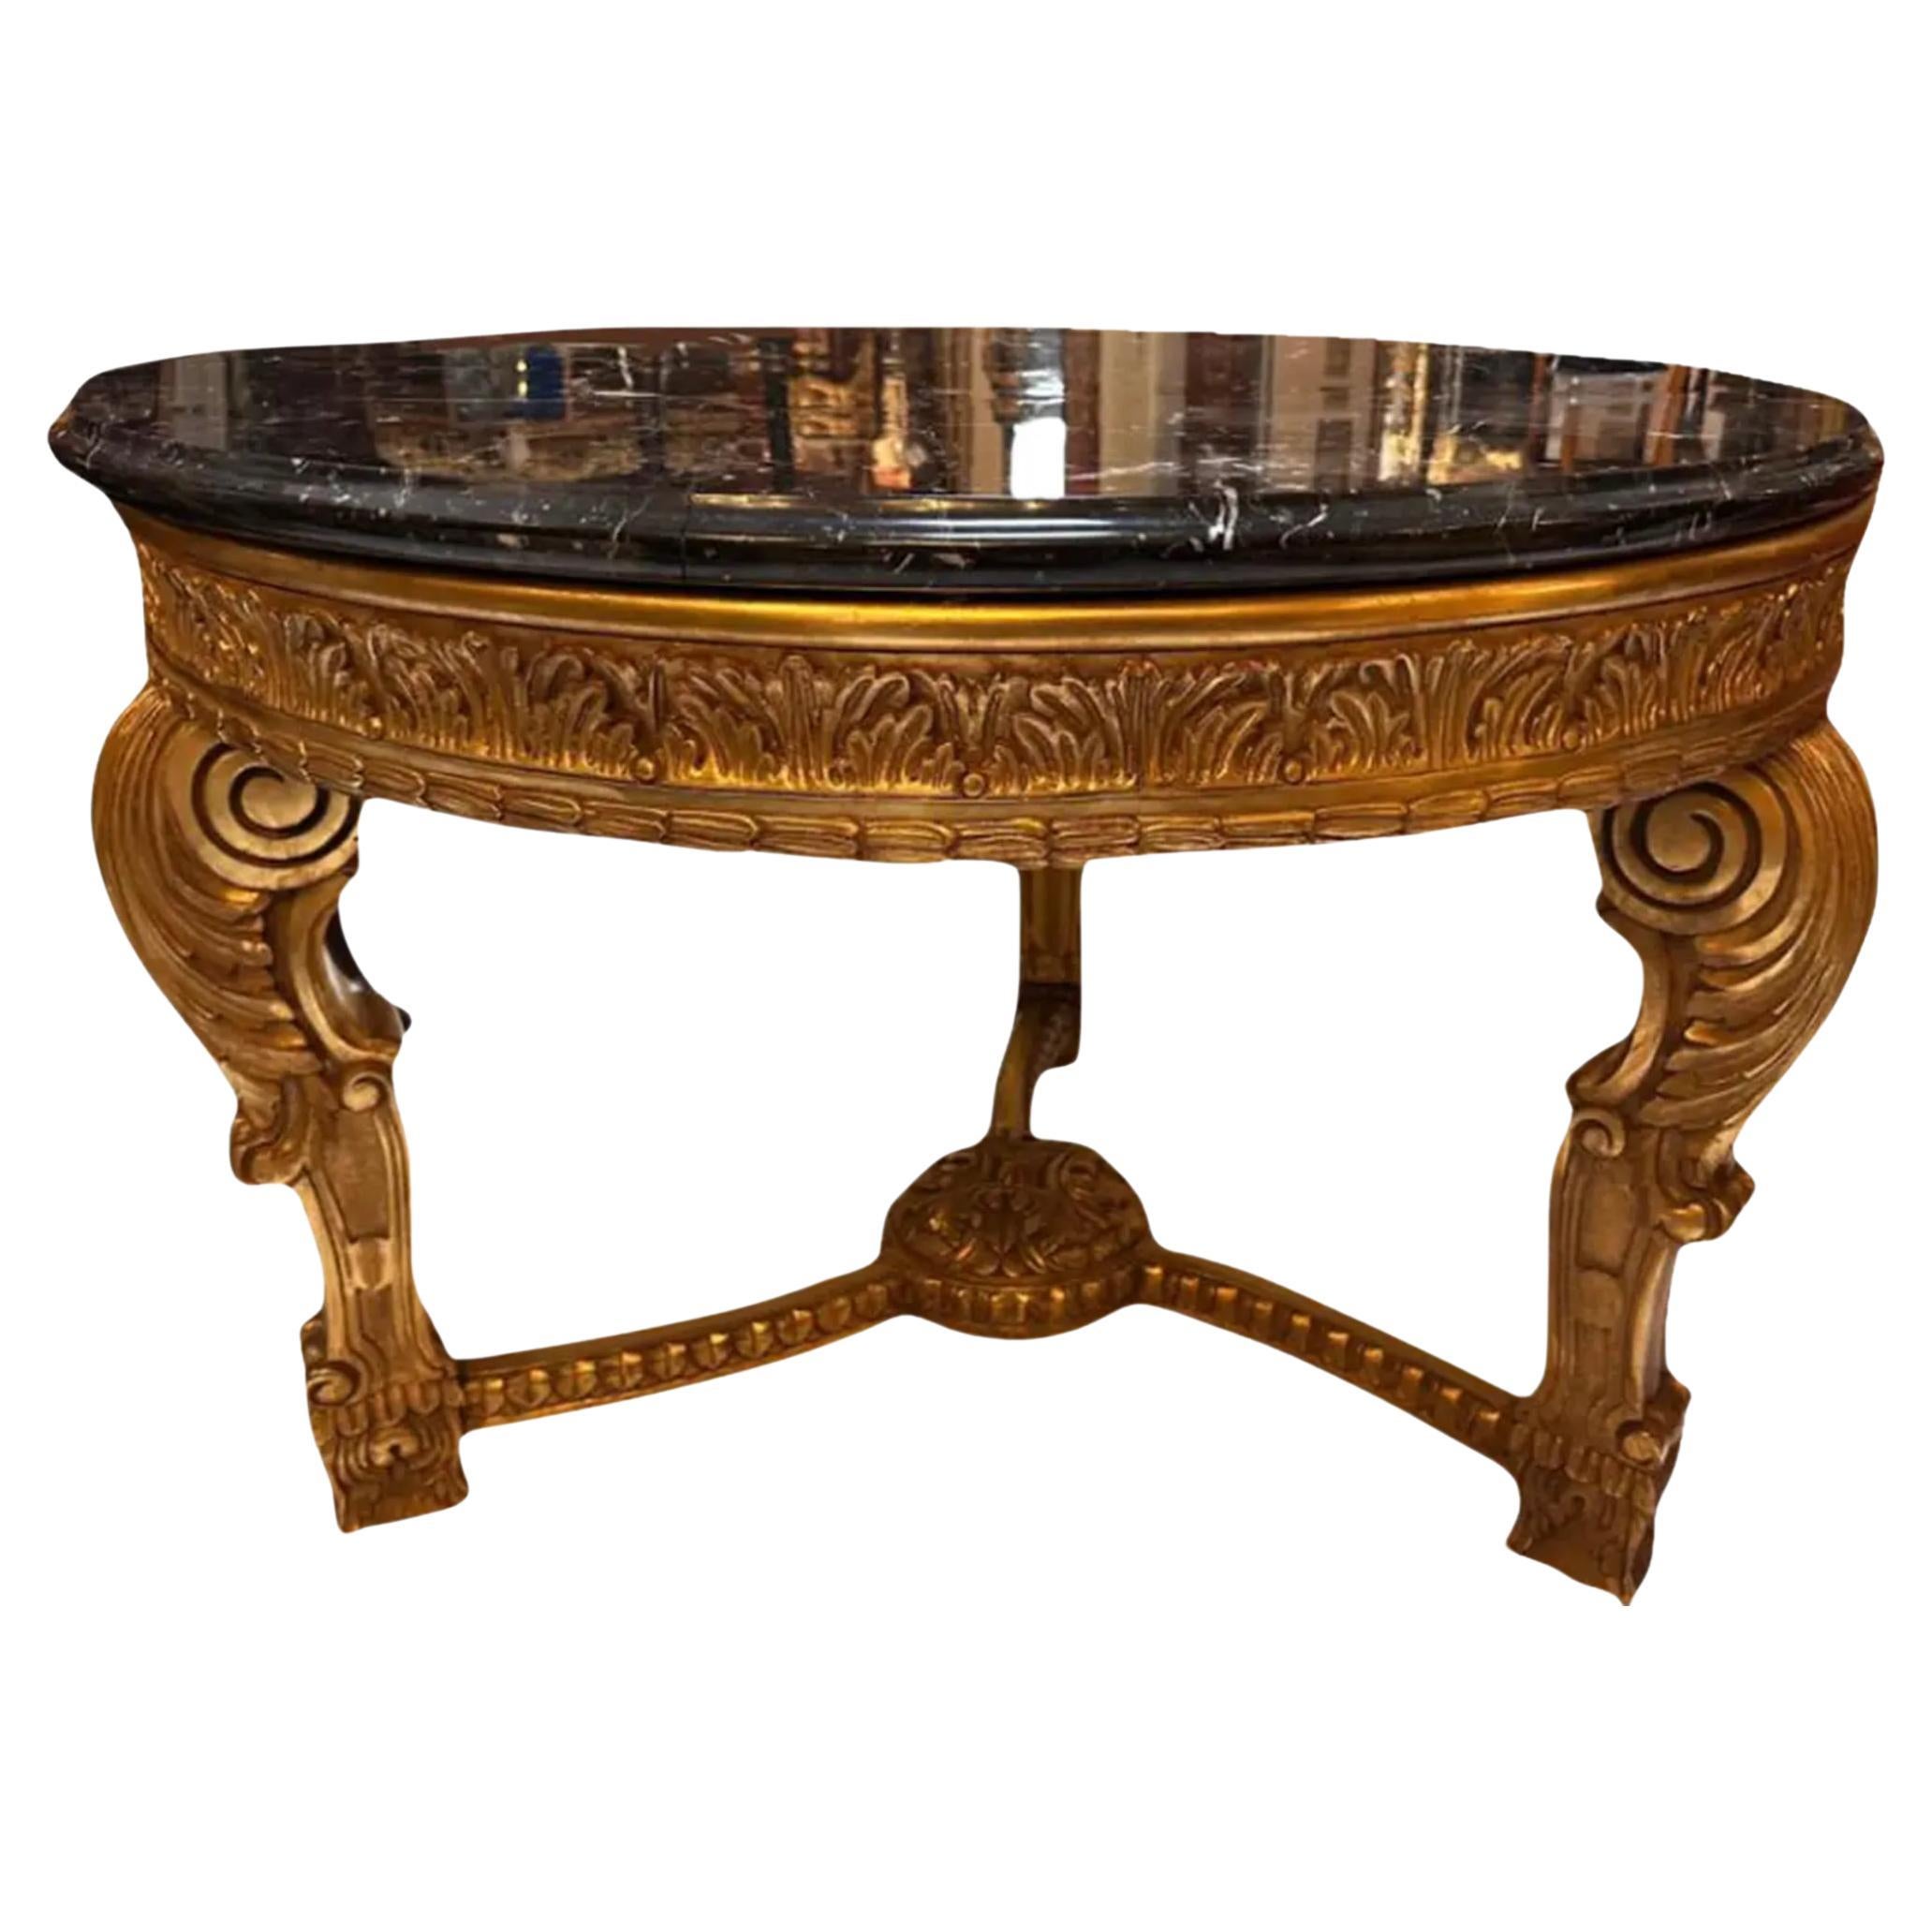 Thomas W. Morgan Giltwood & Black Marble Center Table For Sale